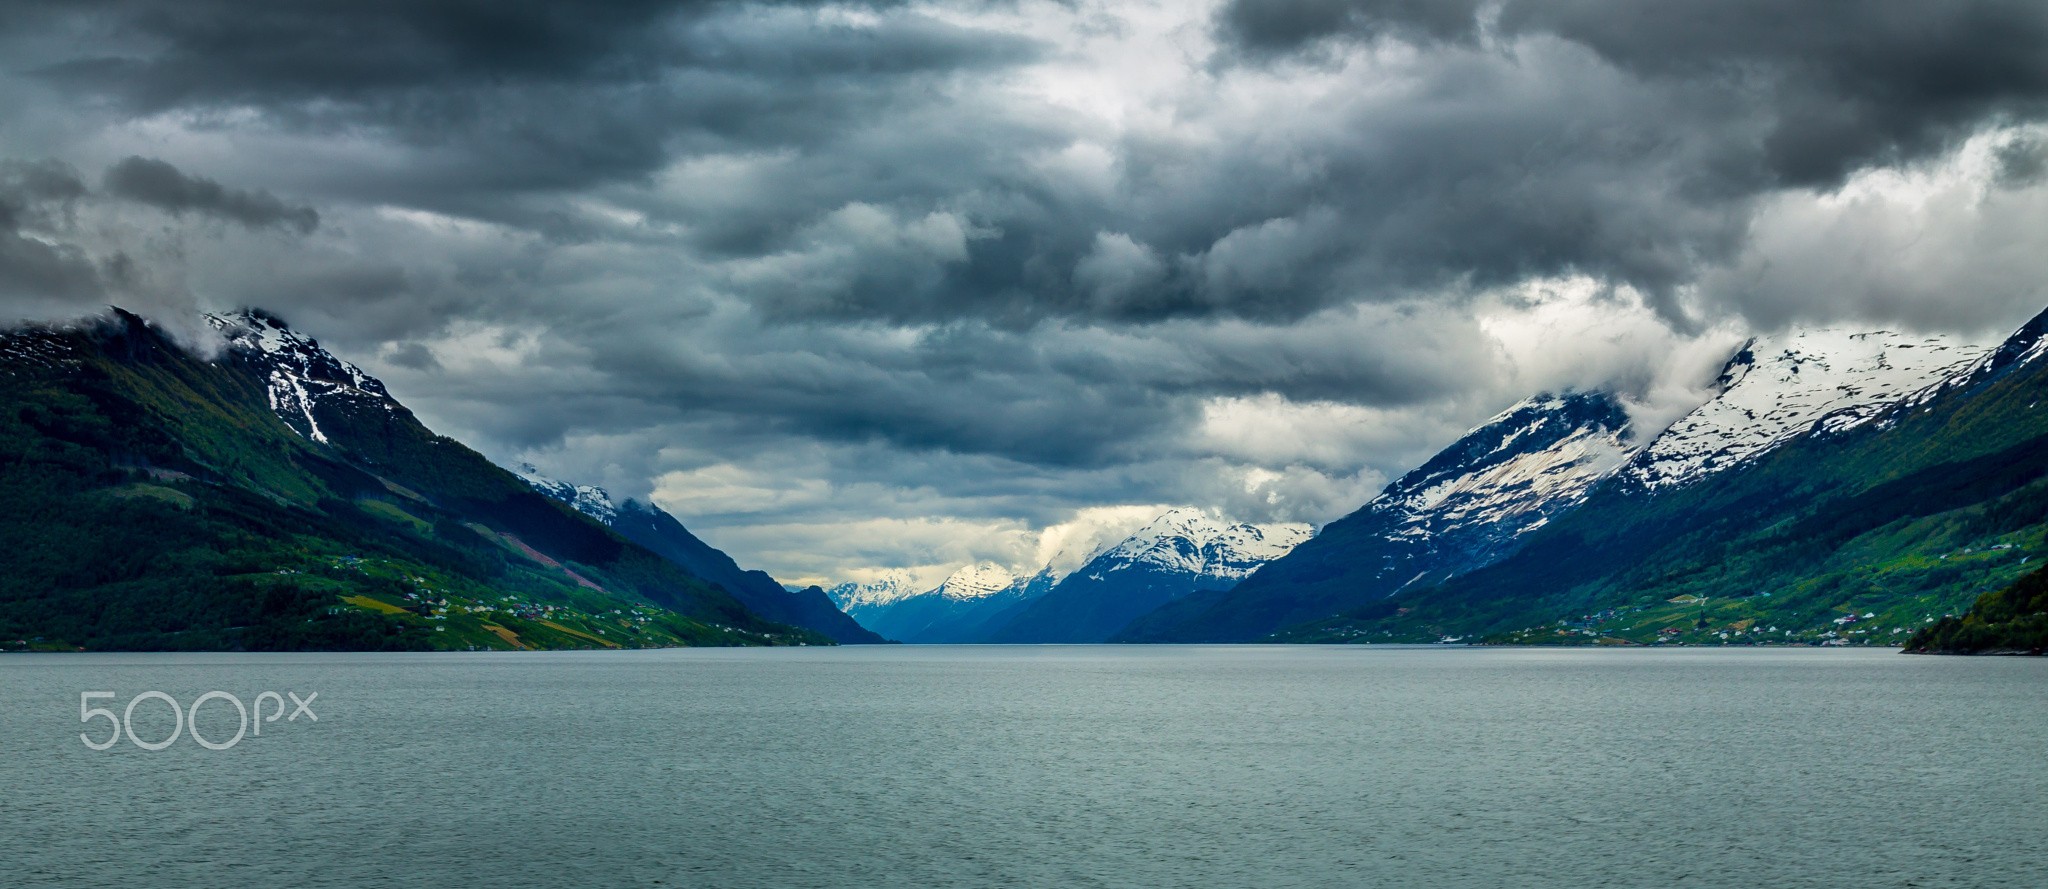 General 2048x889 mountains landscape snowy mountain overcast fjord 500px nature clouds water